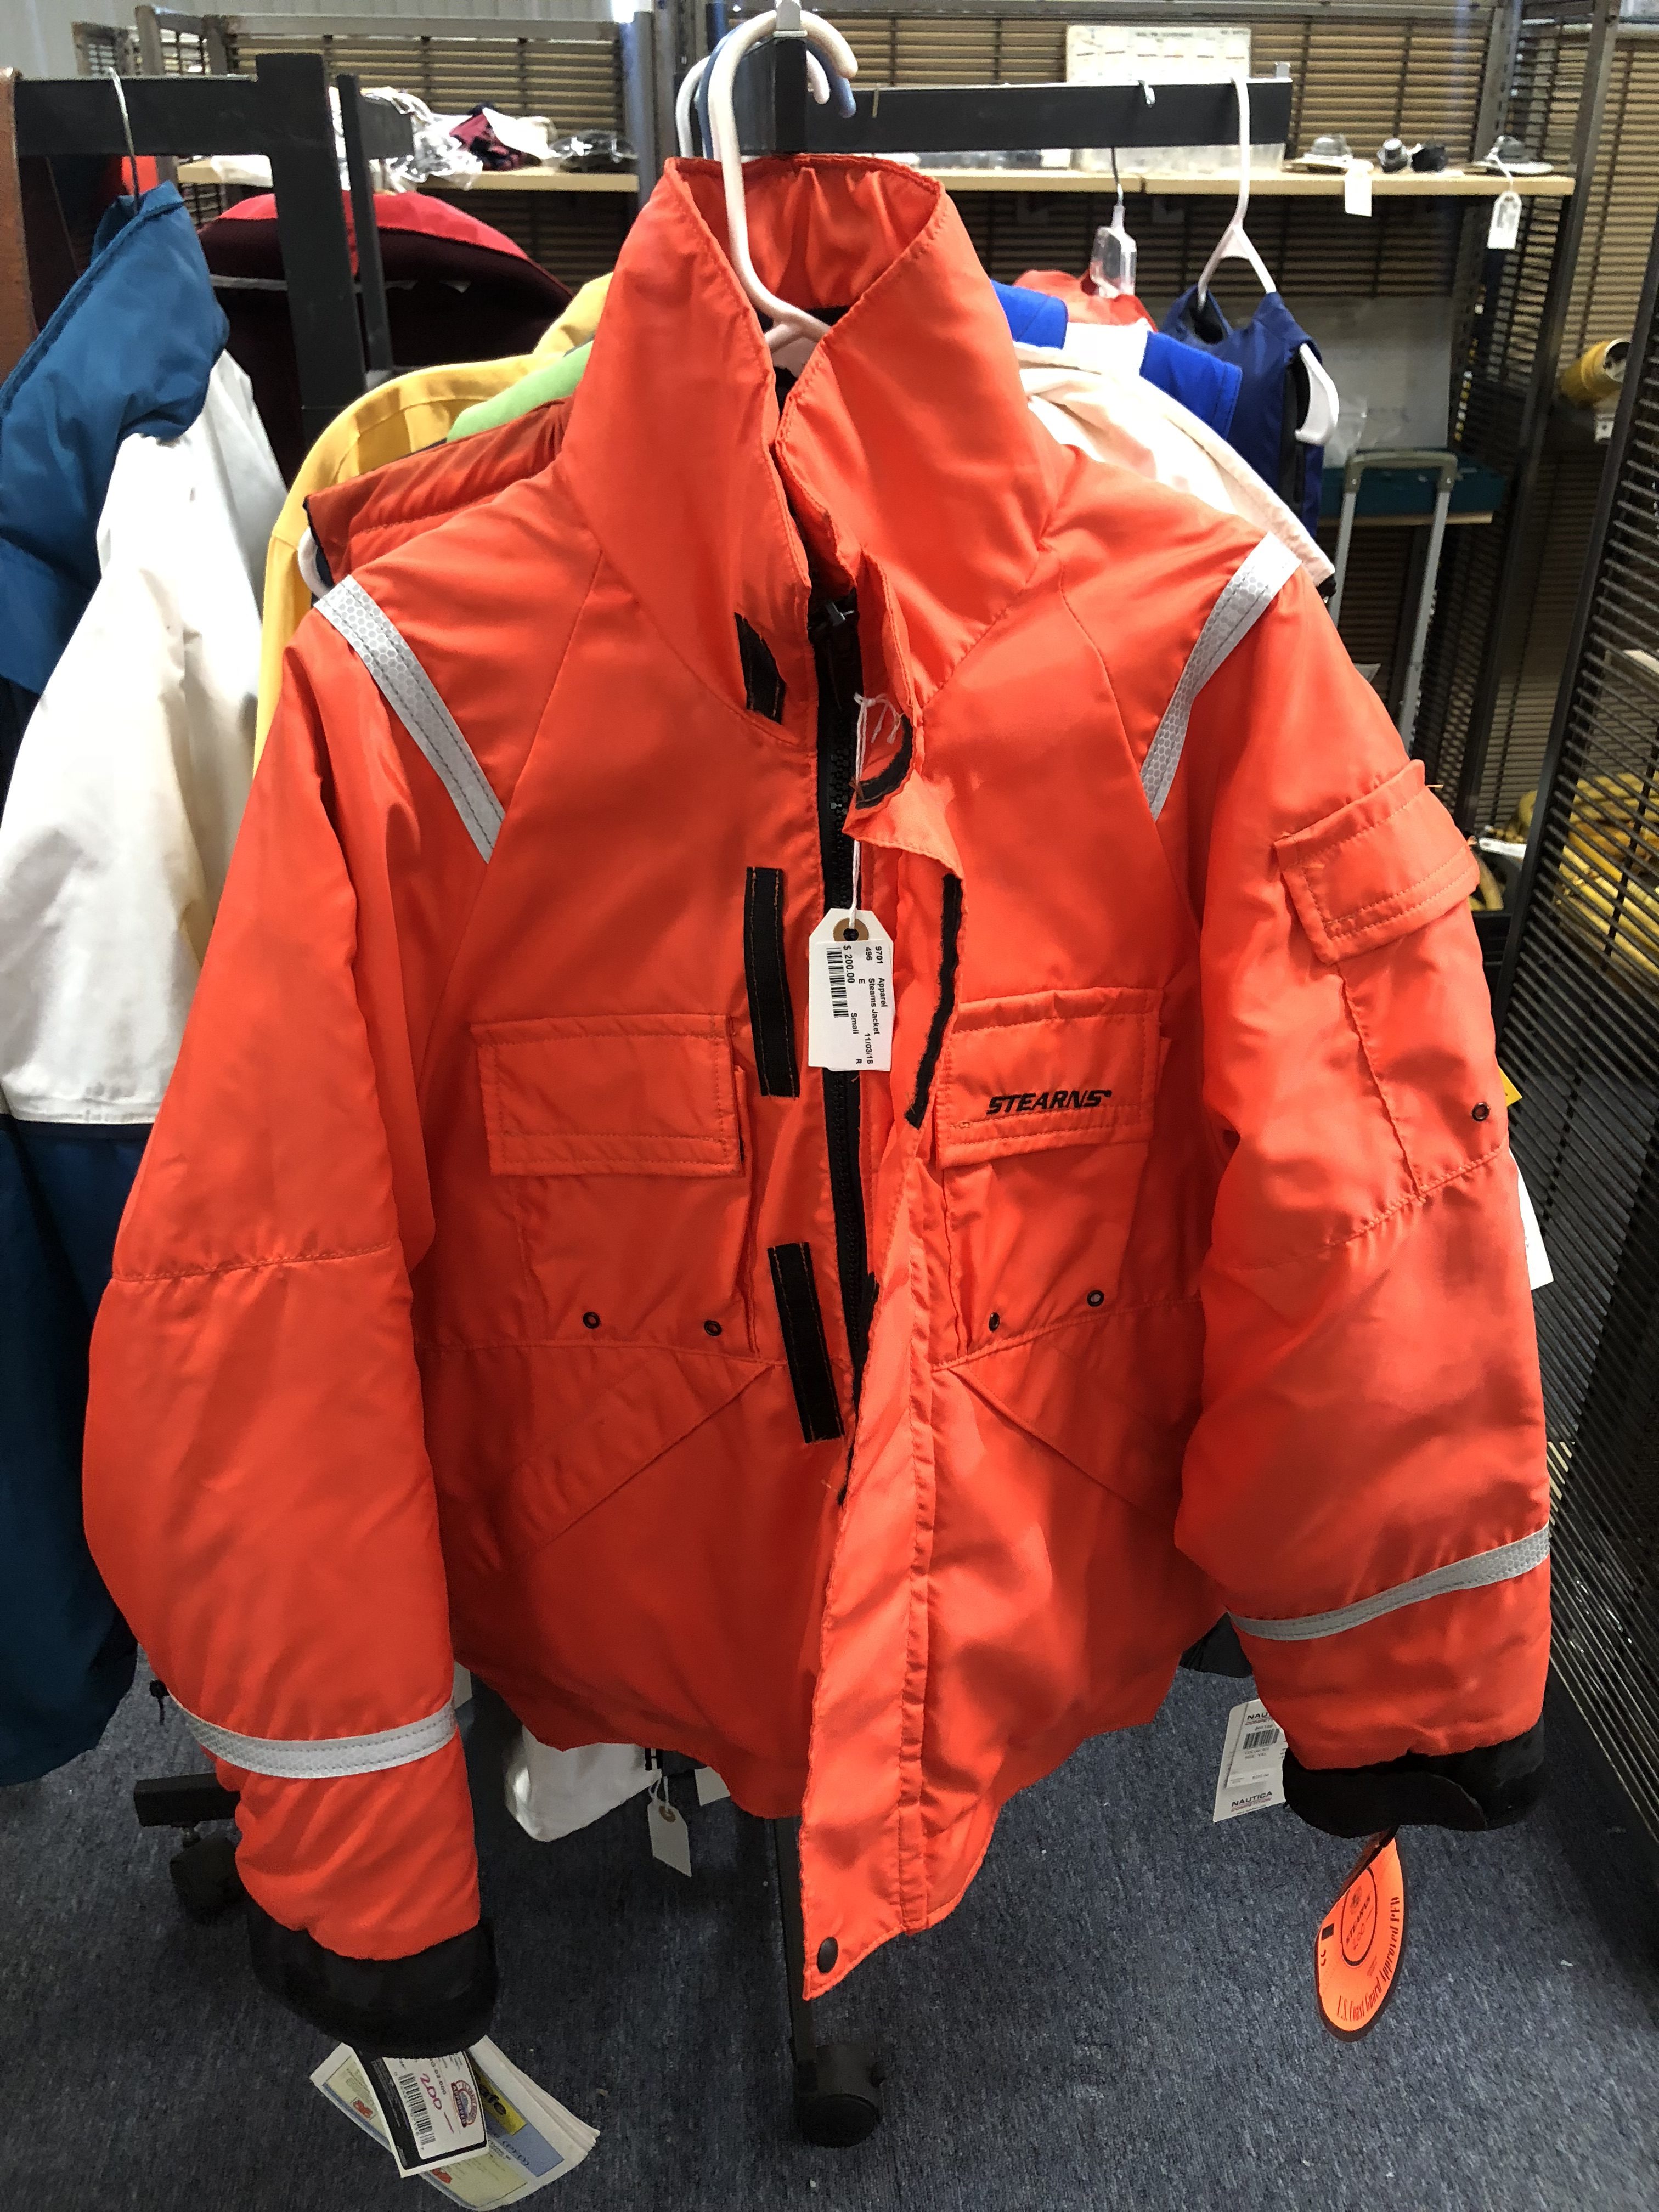 NEW – Stearns Jacket – Size Small